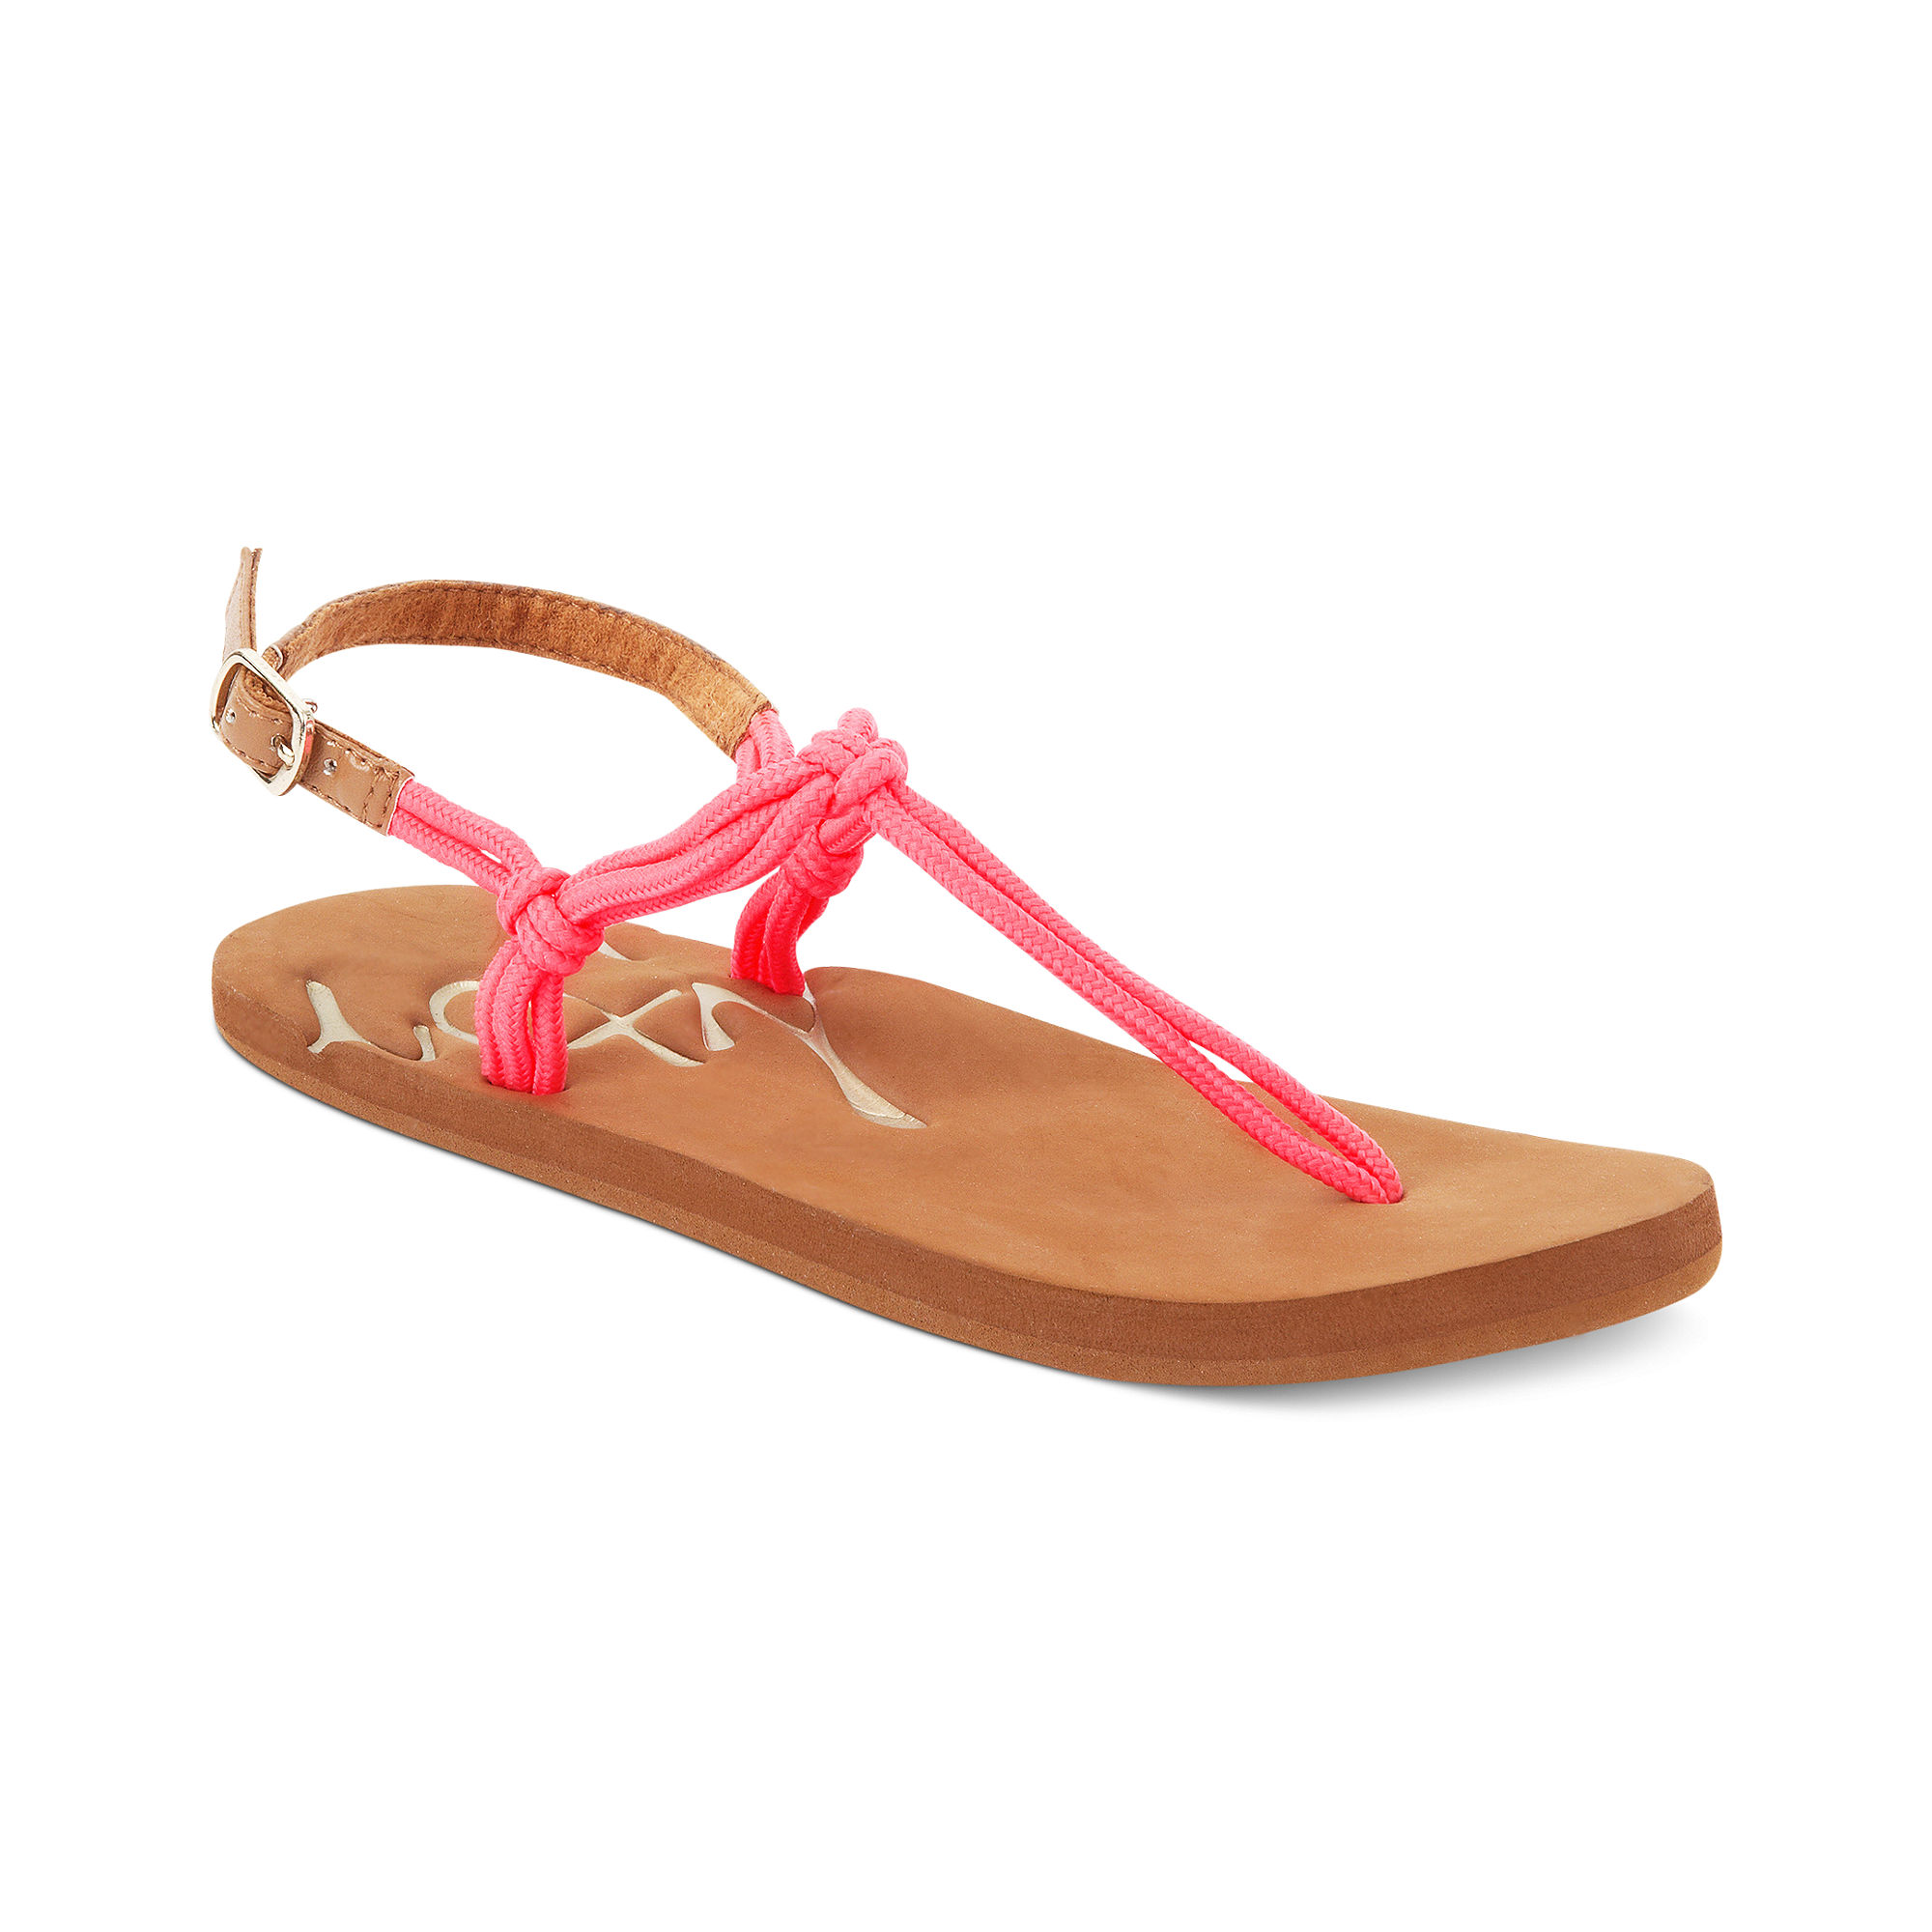 Roxy Catalina Flat Thong Sandals in Pink (Hot Pink) | Lyst